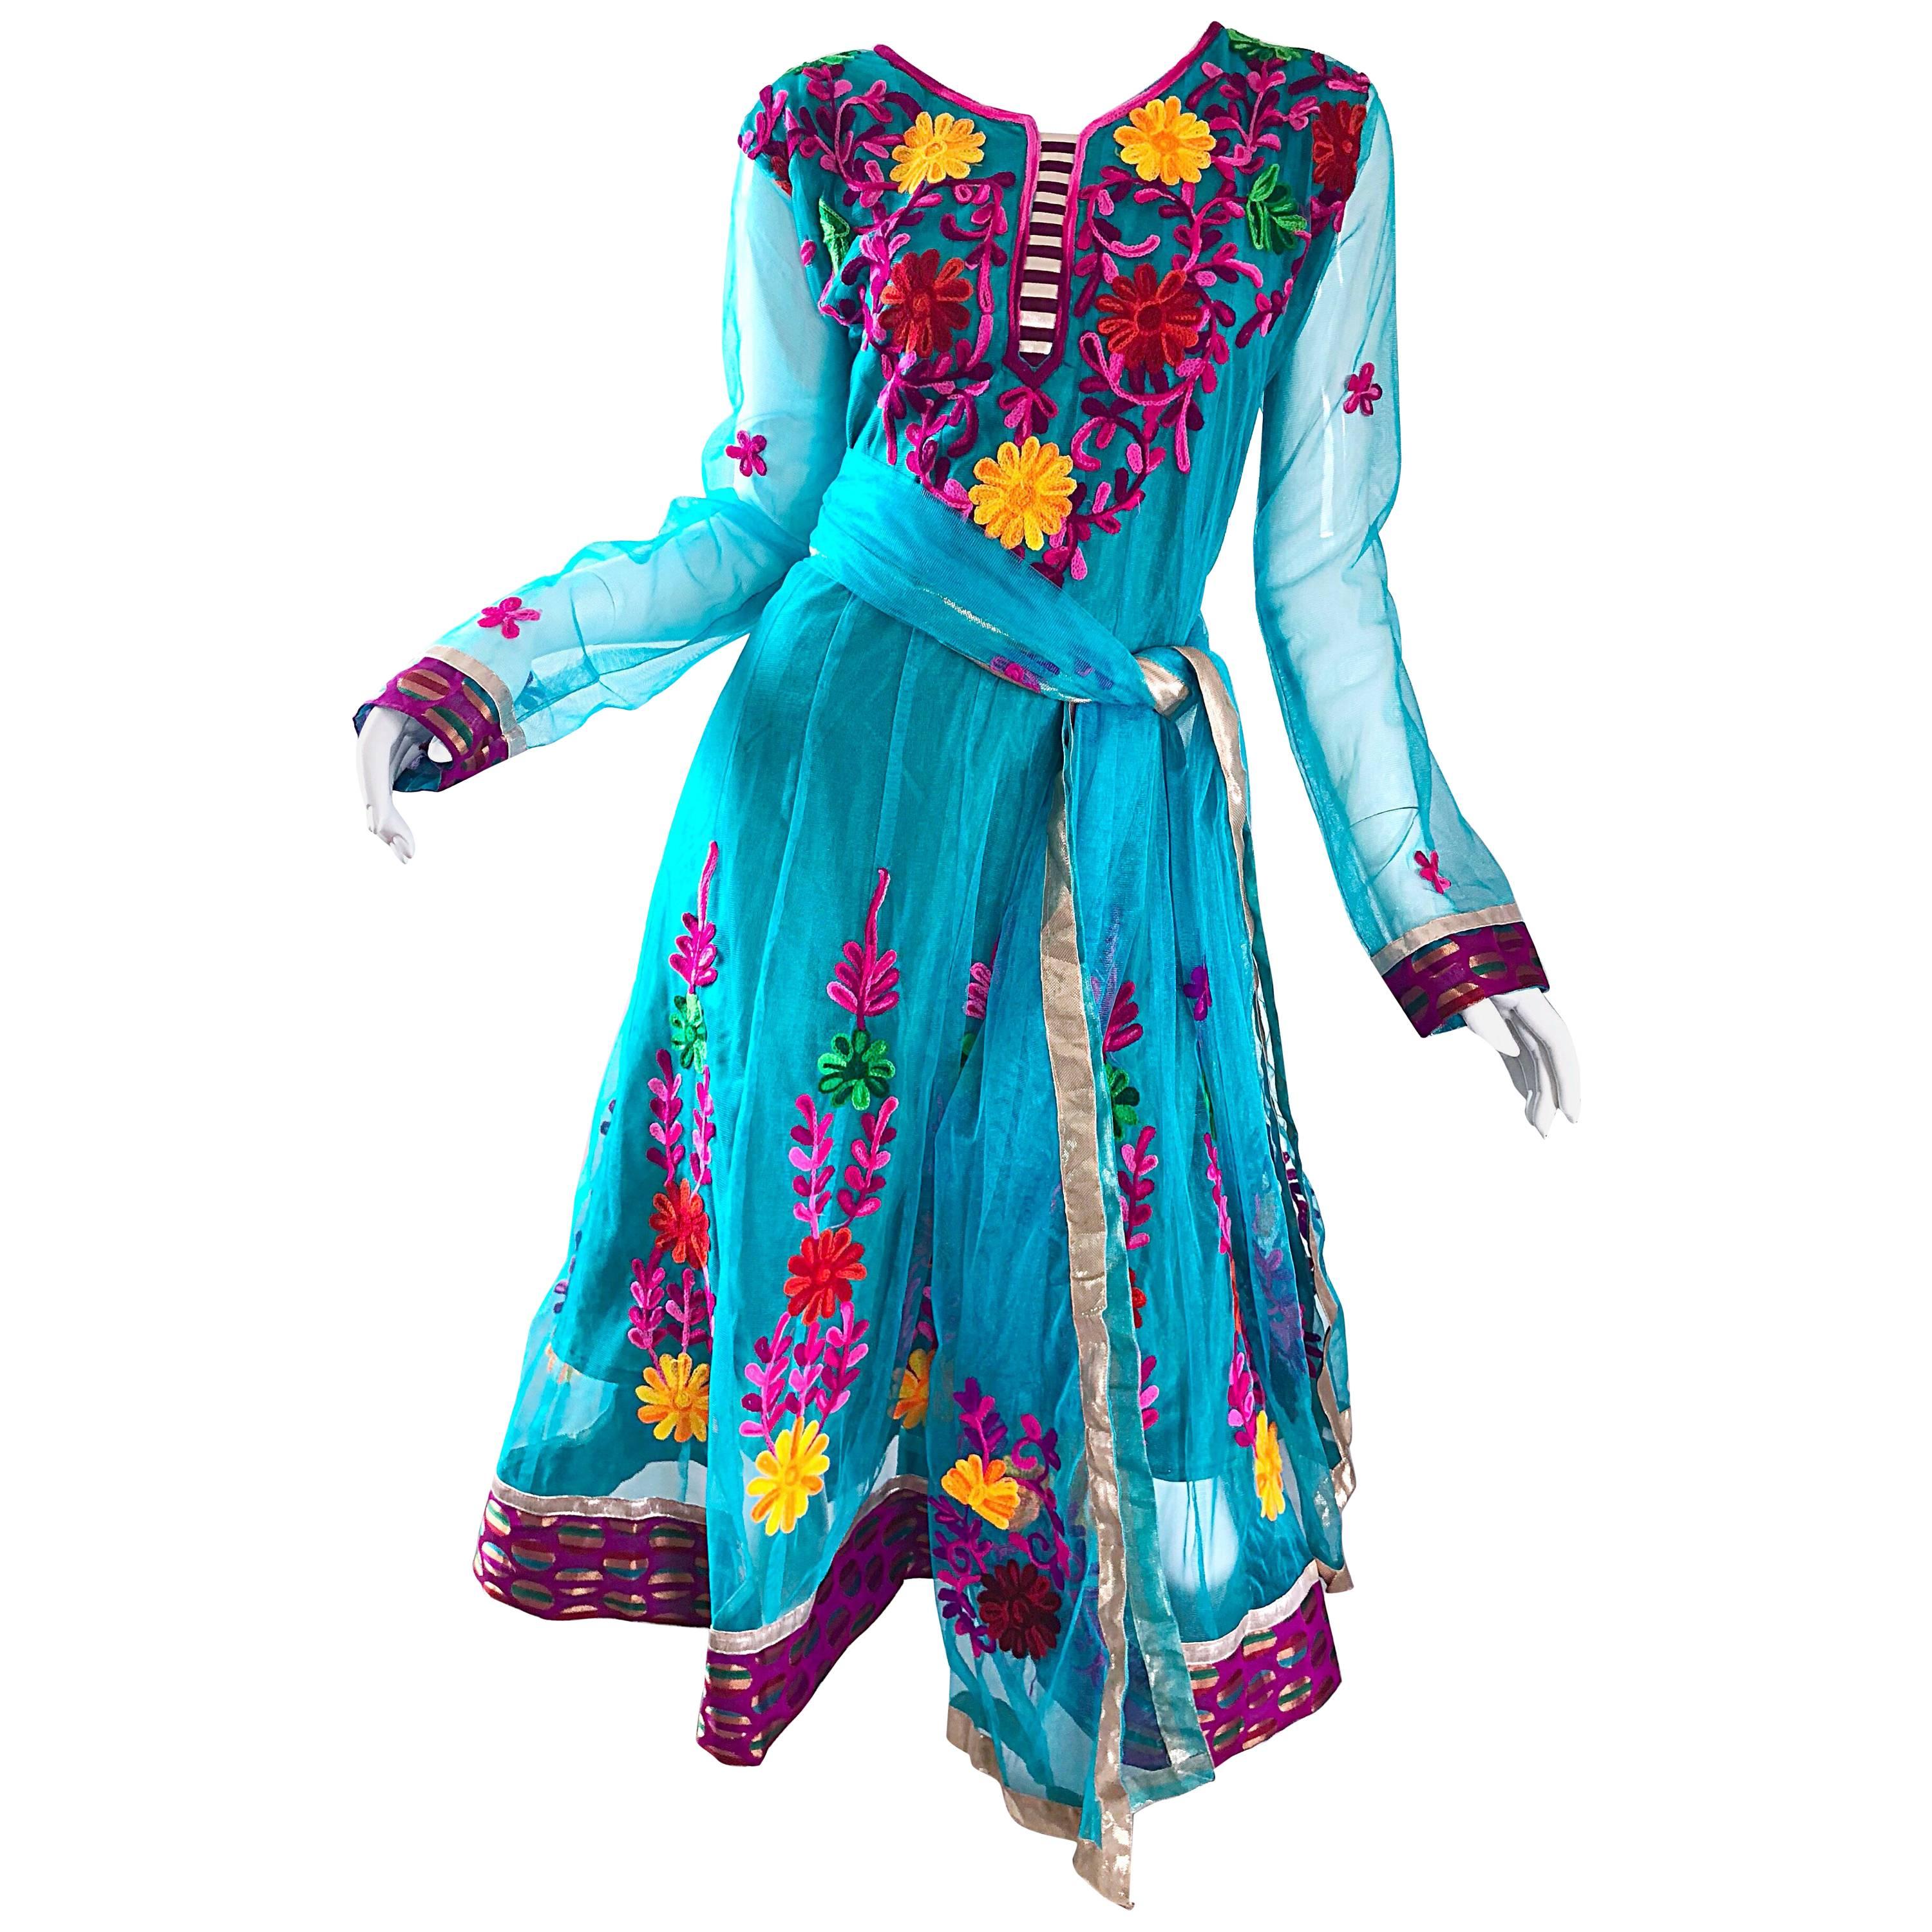 Gorgeous 1970s Turquoise Blue Embroidered Vintage Indian Kurta 70s Dress + Sash For Sale